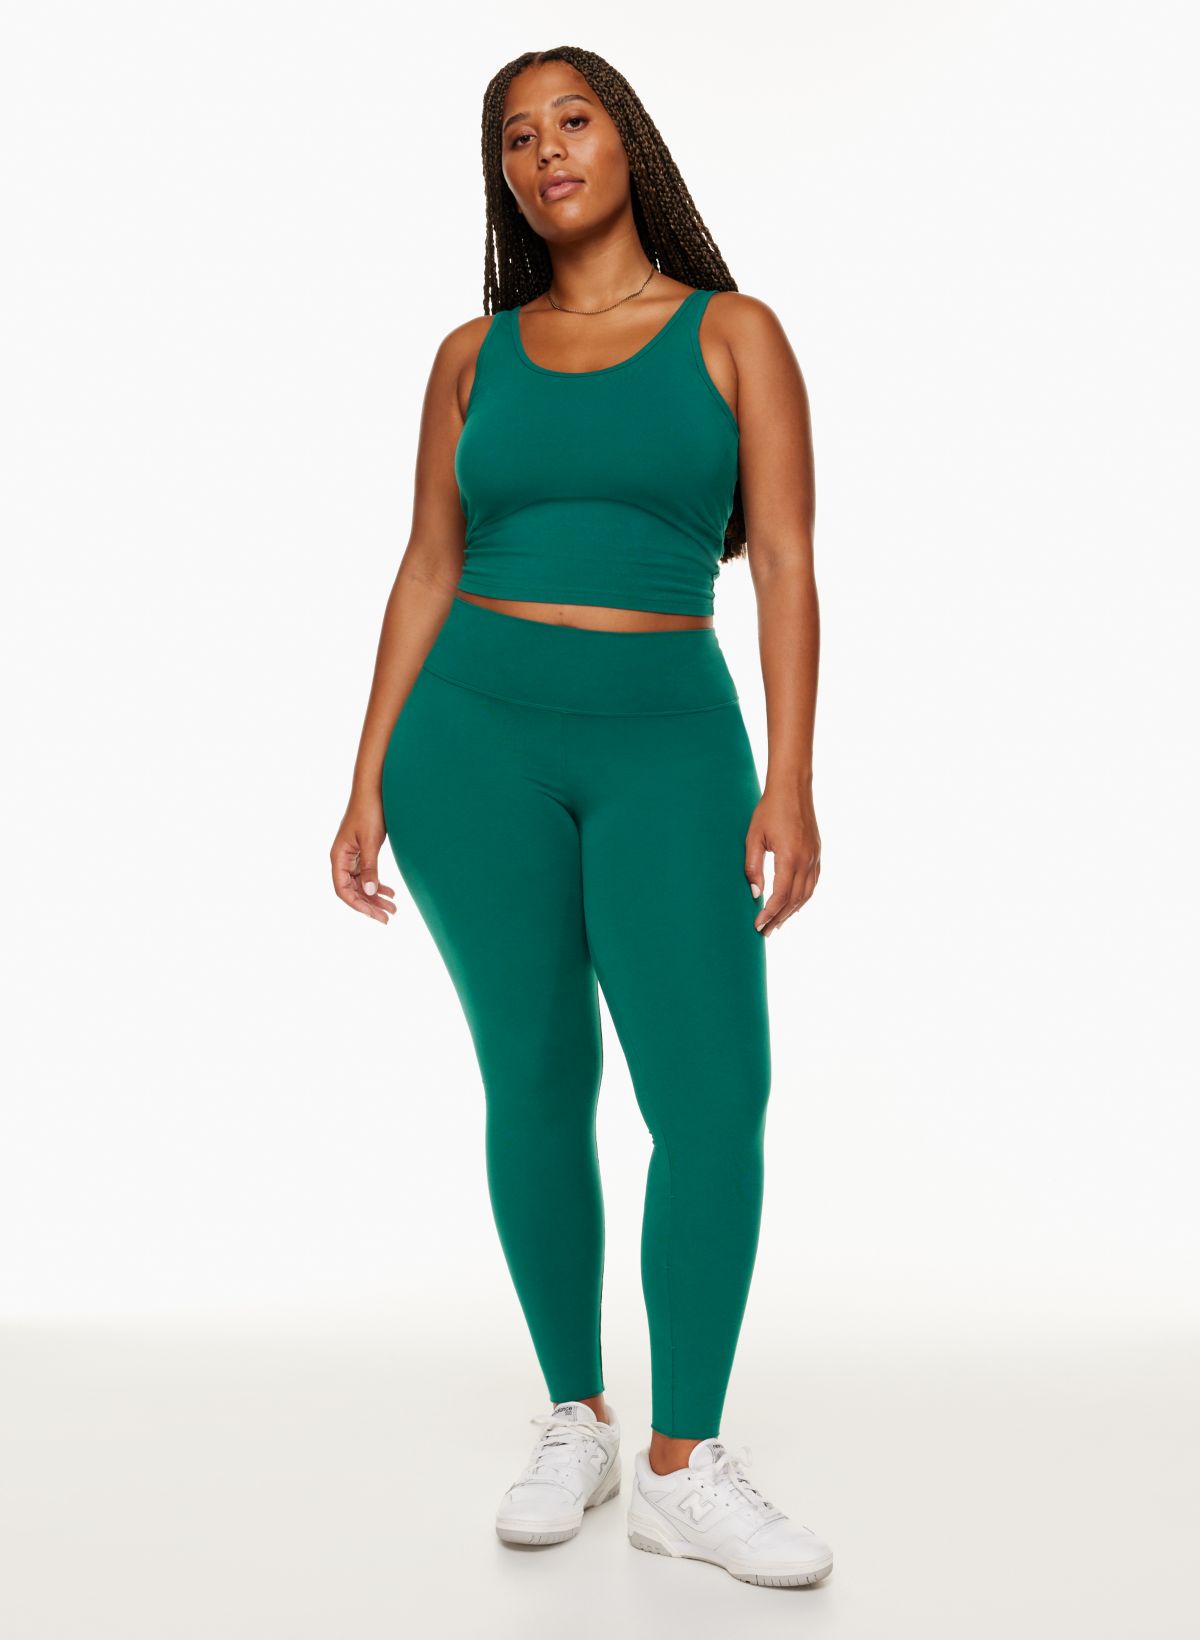 Aerie green chill play move leggings Size XS - $20 - From Karina